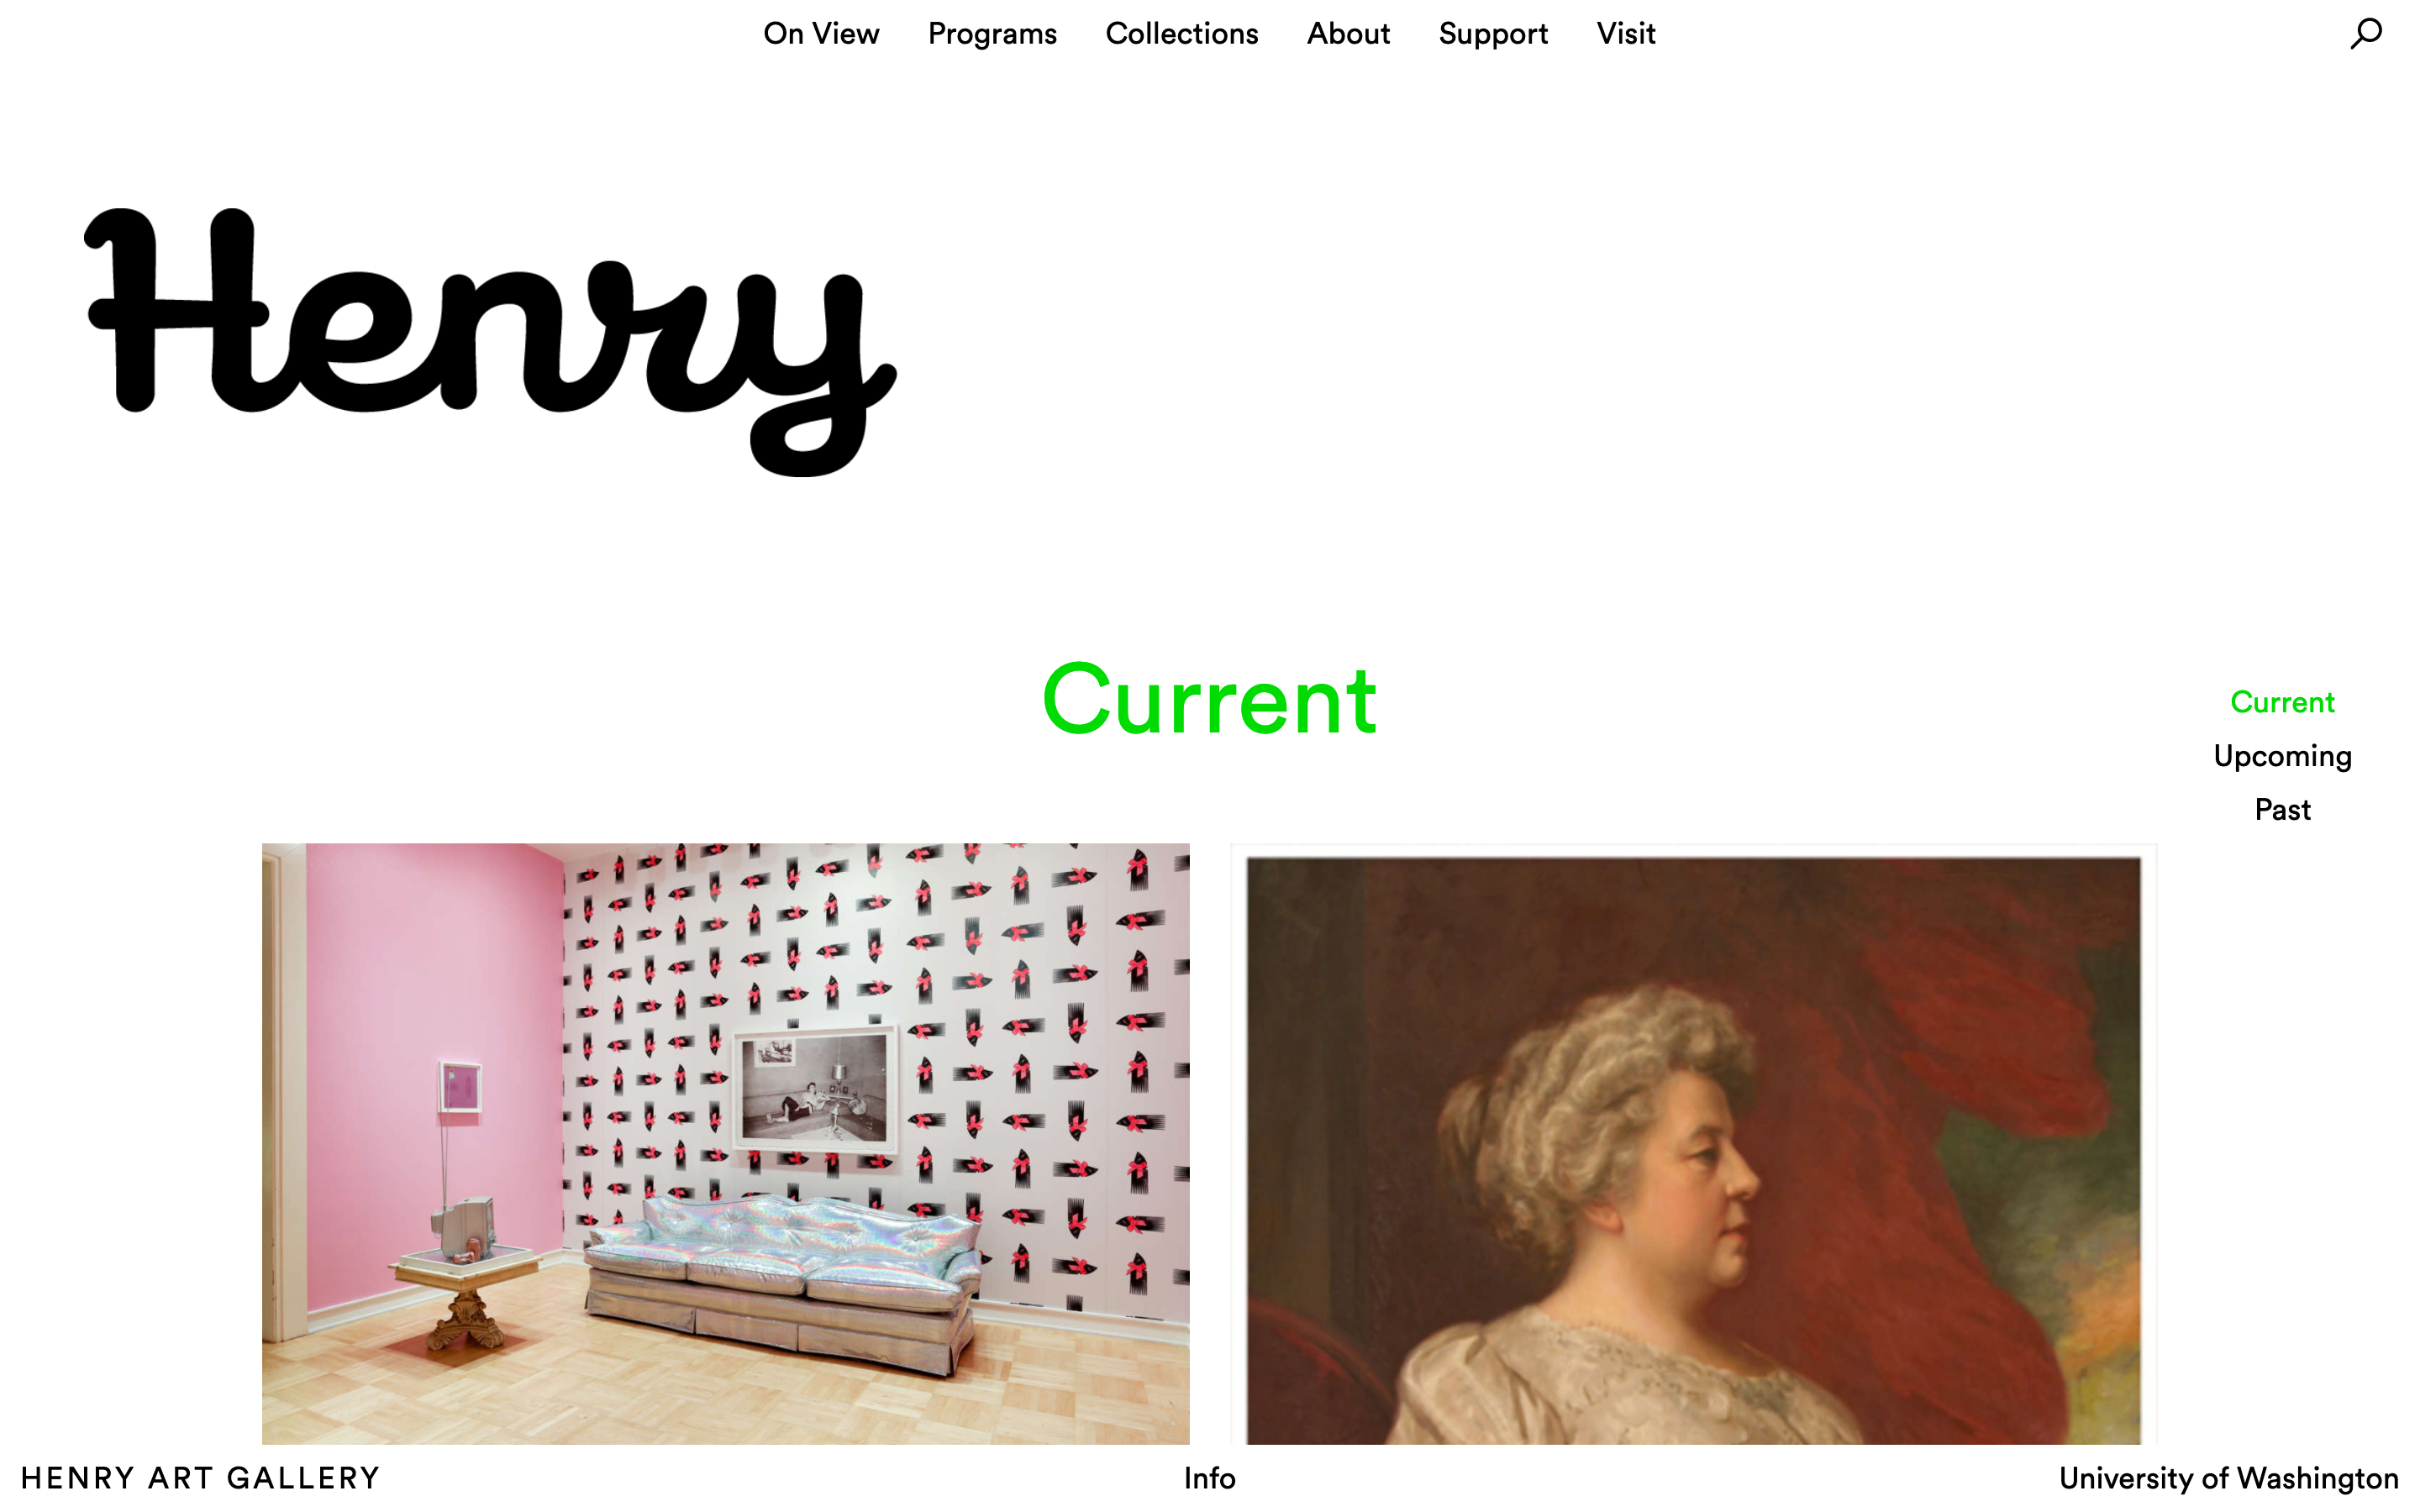 The Henry Art Gallery Website: Current Work